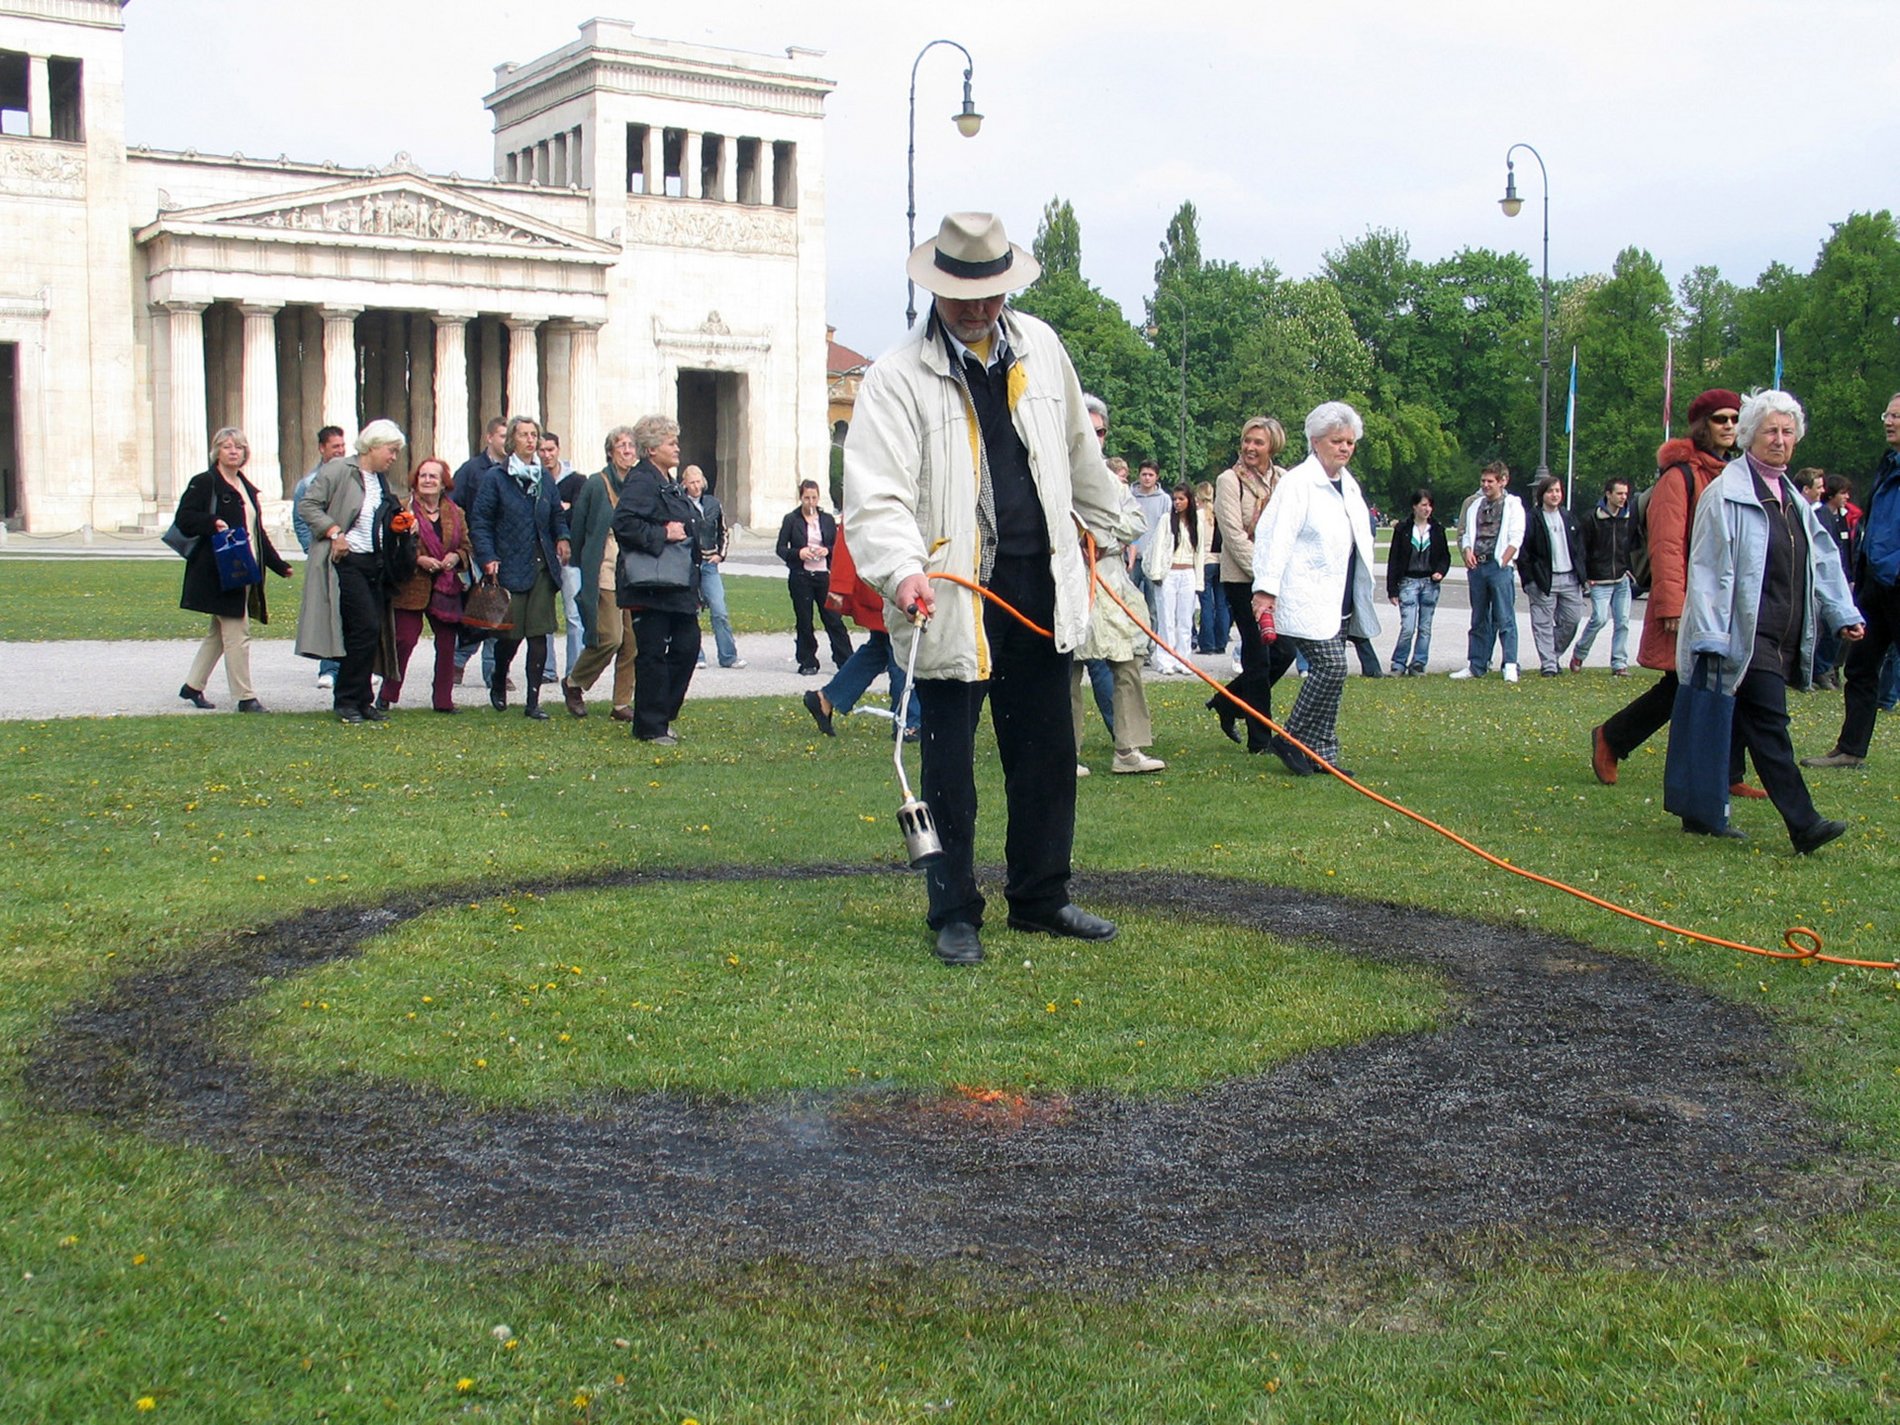 A person uses a bunsen burner to burn a circle into the lawn in front of the Staatliche Antikensammlungen.